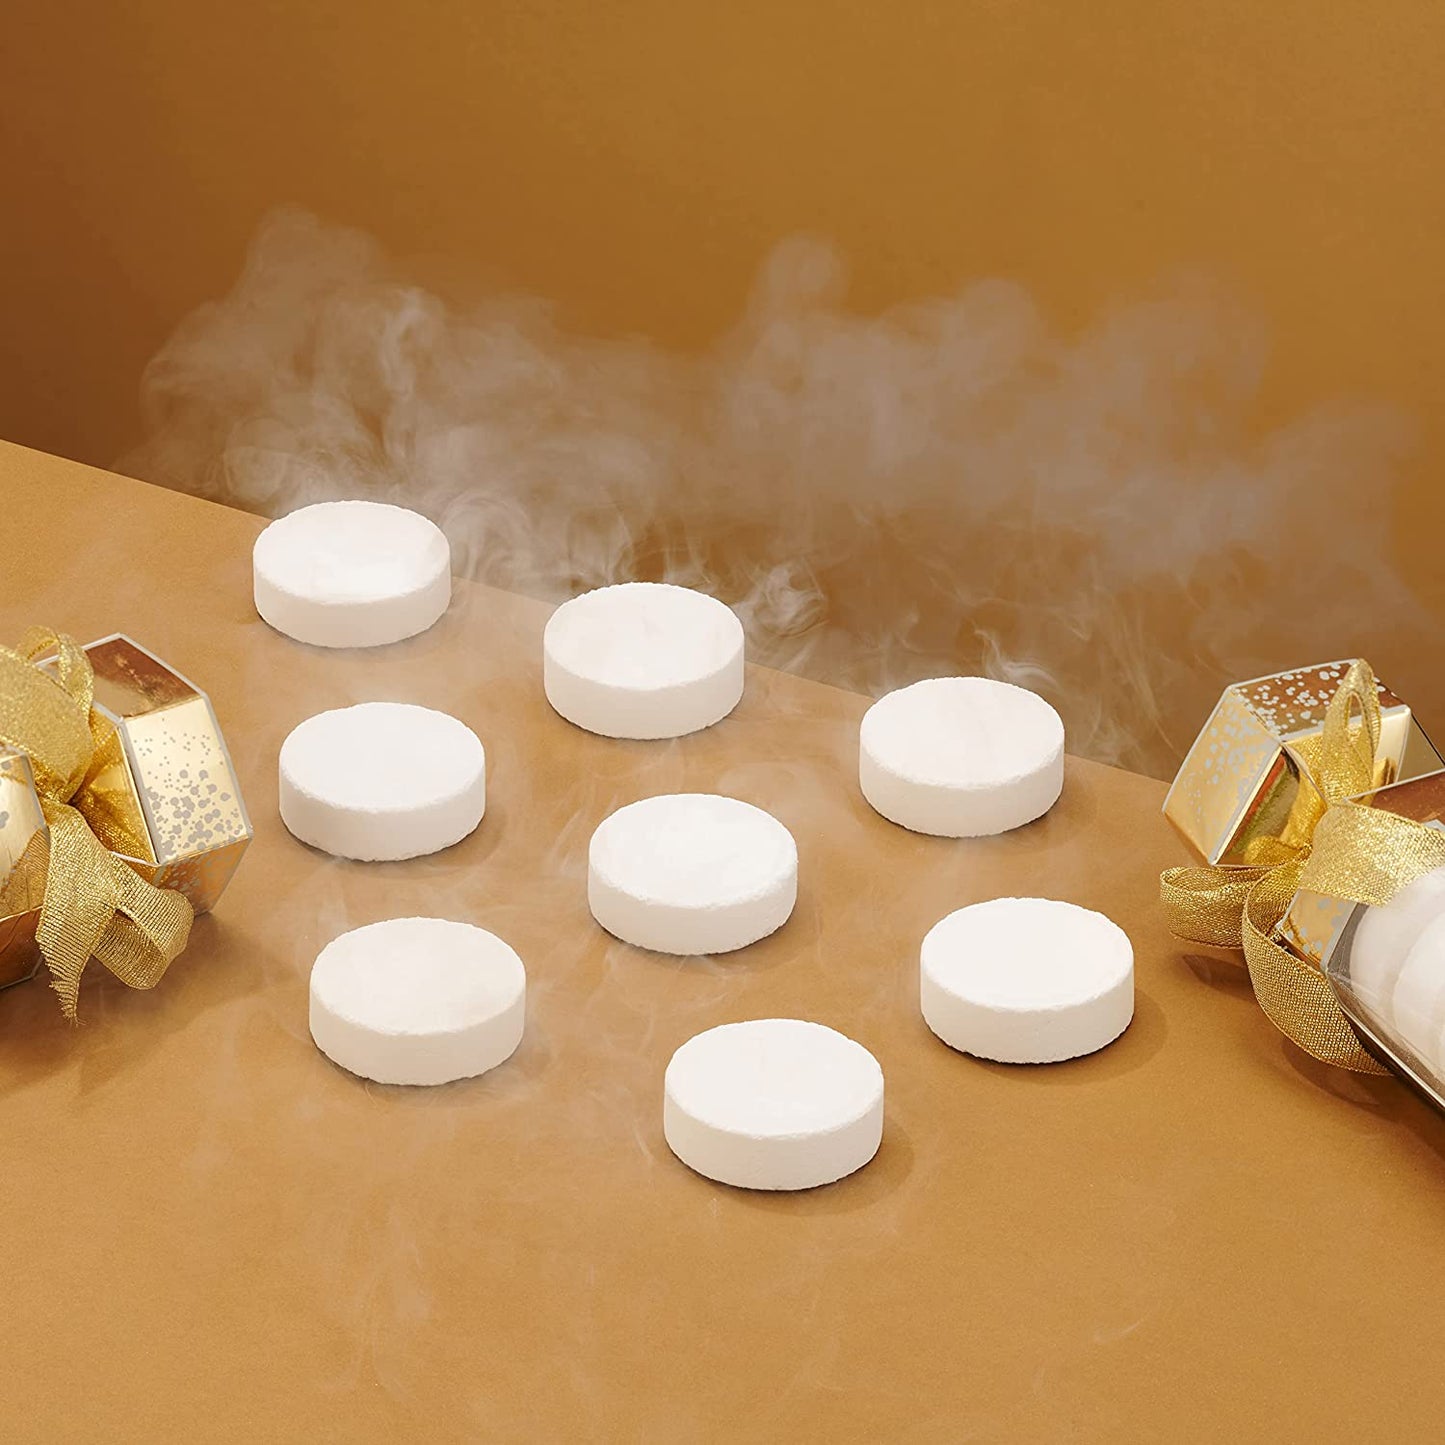 Shower Steamers Vapor Tablets - 8 Aromatherapy Shower Bombs